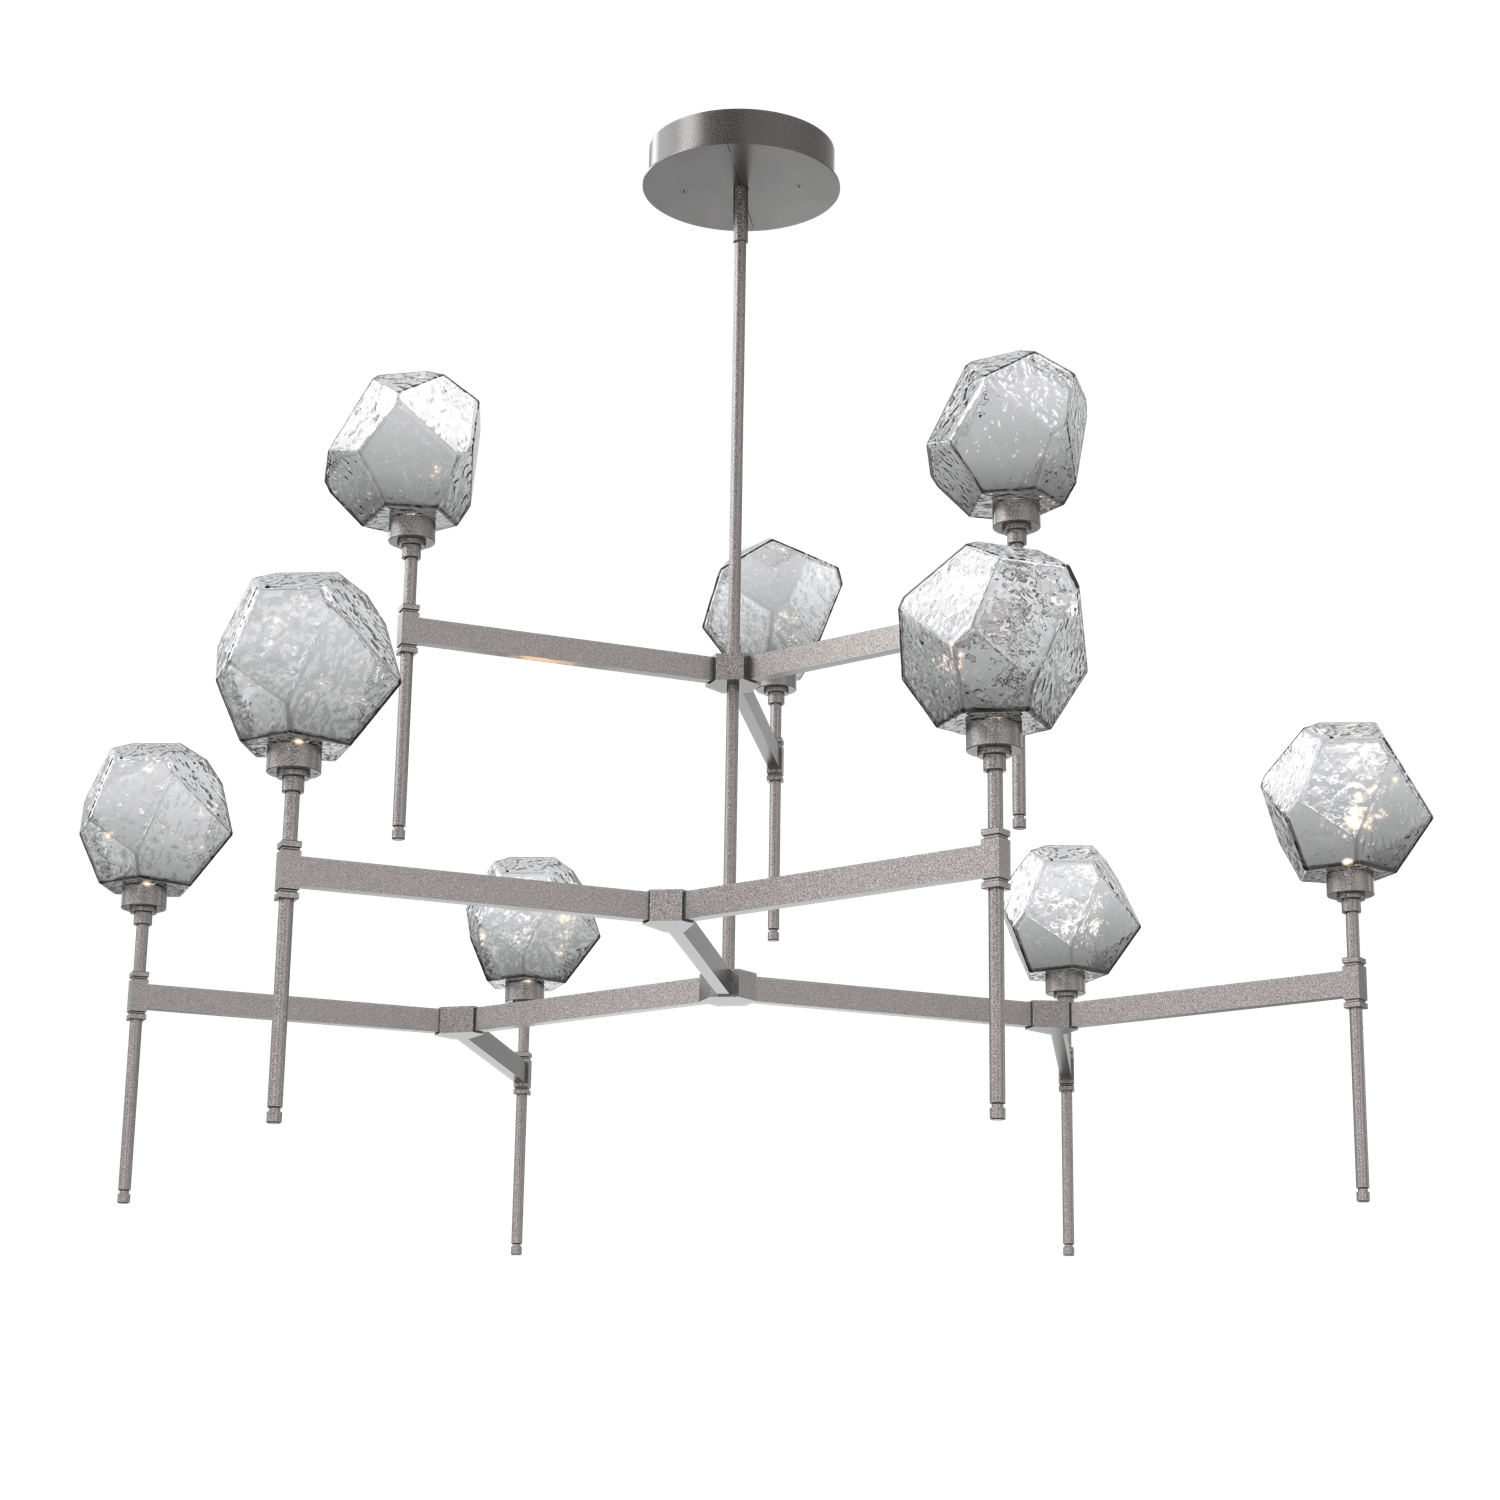 CHB0039-55-GP-S-Hammerton-Studio-Gem-round-two-tier-belvedere-chandelier-with-graphite-finish-and-smoke-blown-glass-shades-and-LED-lamping